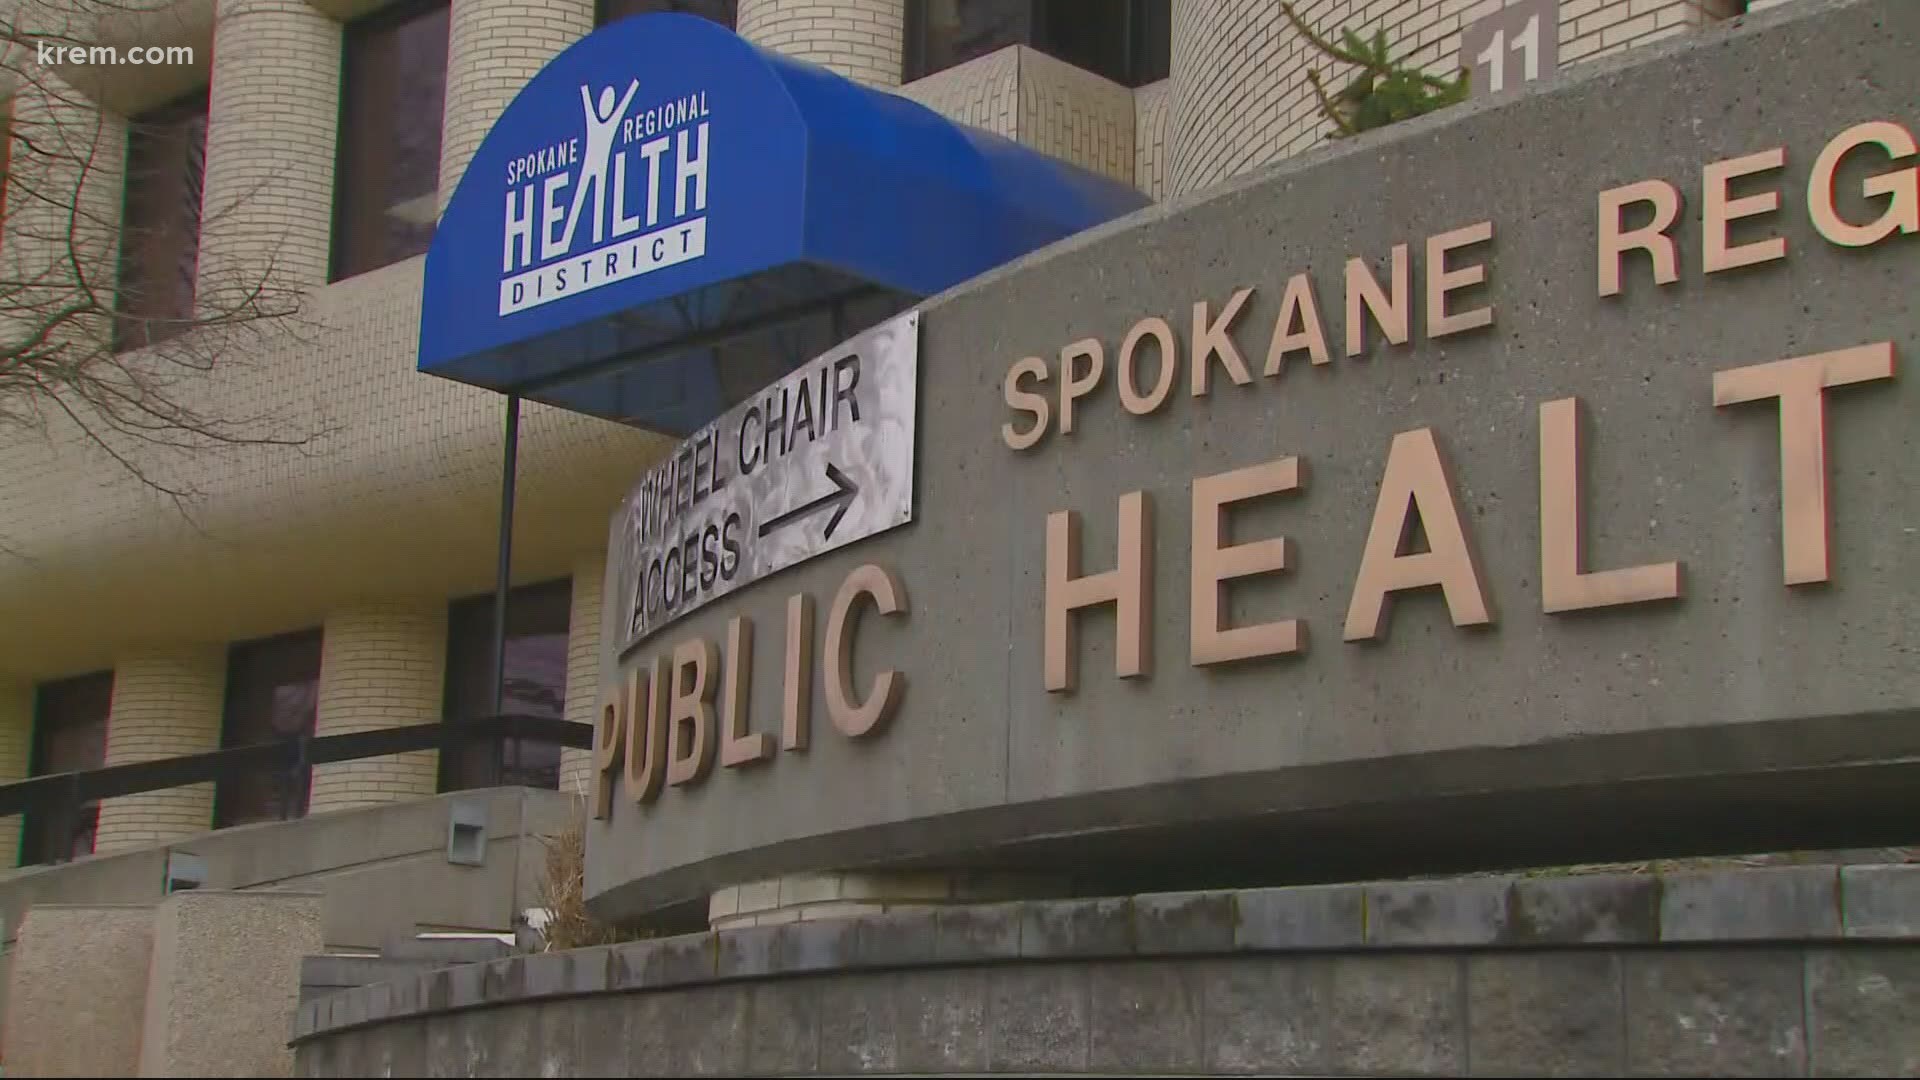 The increase in COVID-19 cases for Spokane County is mainly stemming from private gatherings and community spread, health officials said.